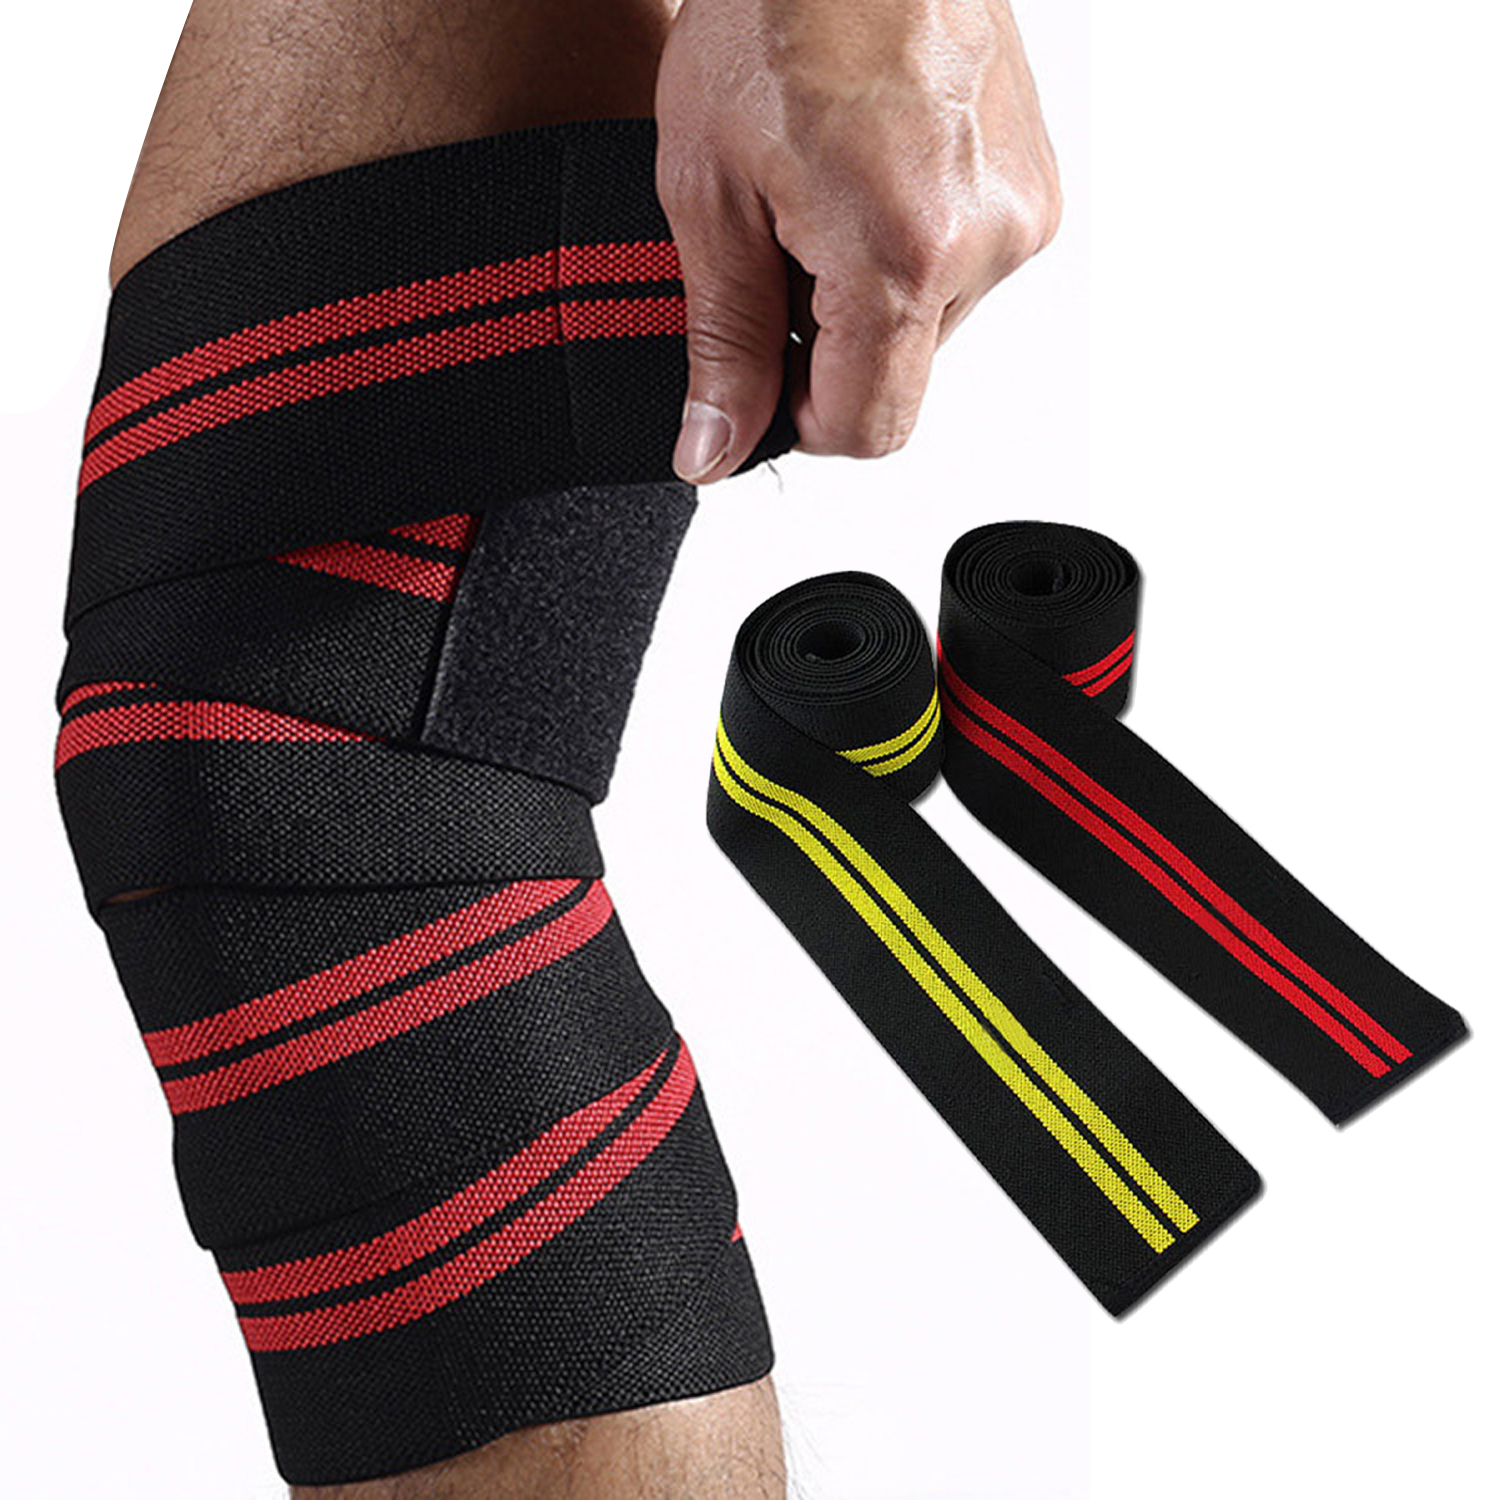 200*8CM Sport Fitness Workout Gym Straps Leg Protection Silicone Bandage Antiskid Squat Weight Lifting Fitness